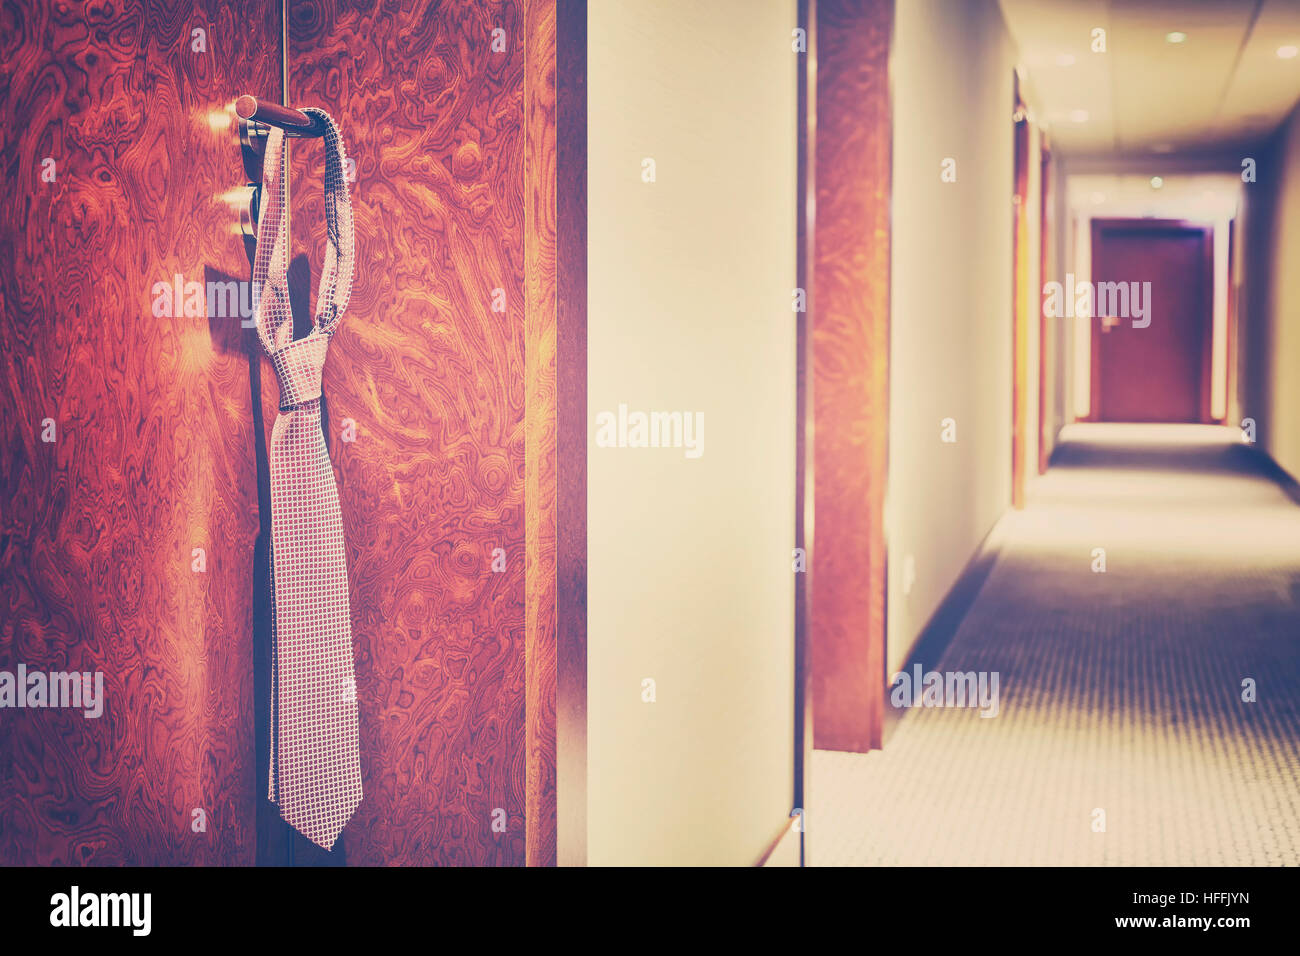 Vintage stylized tie hanging on a hotel closed door handle. Stock Photo